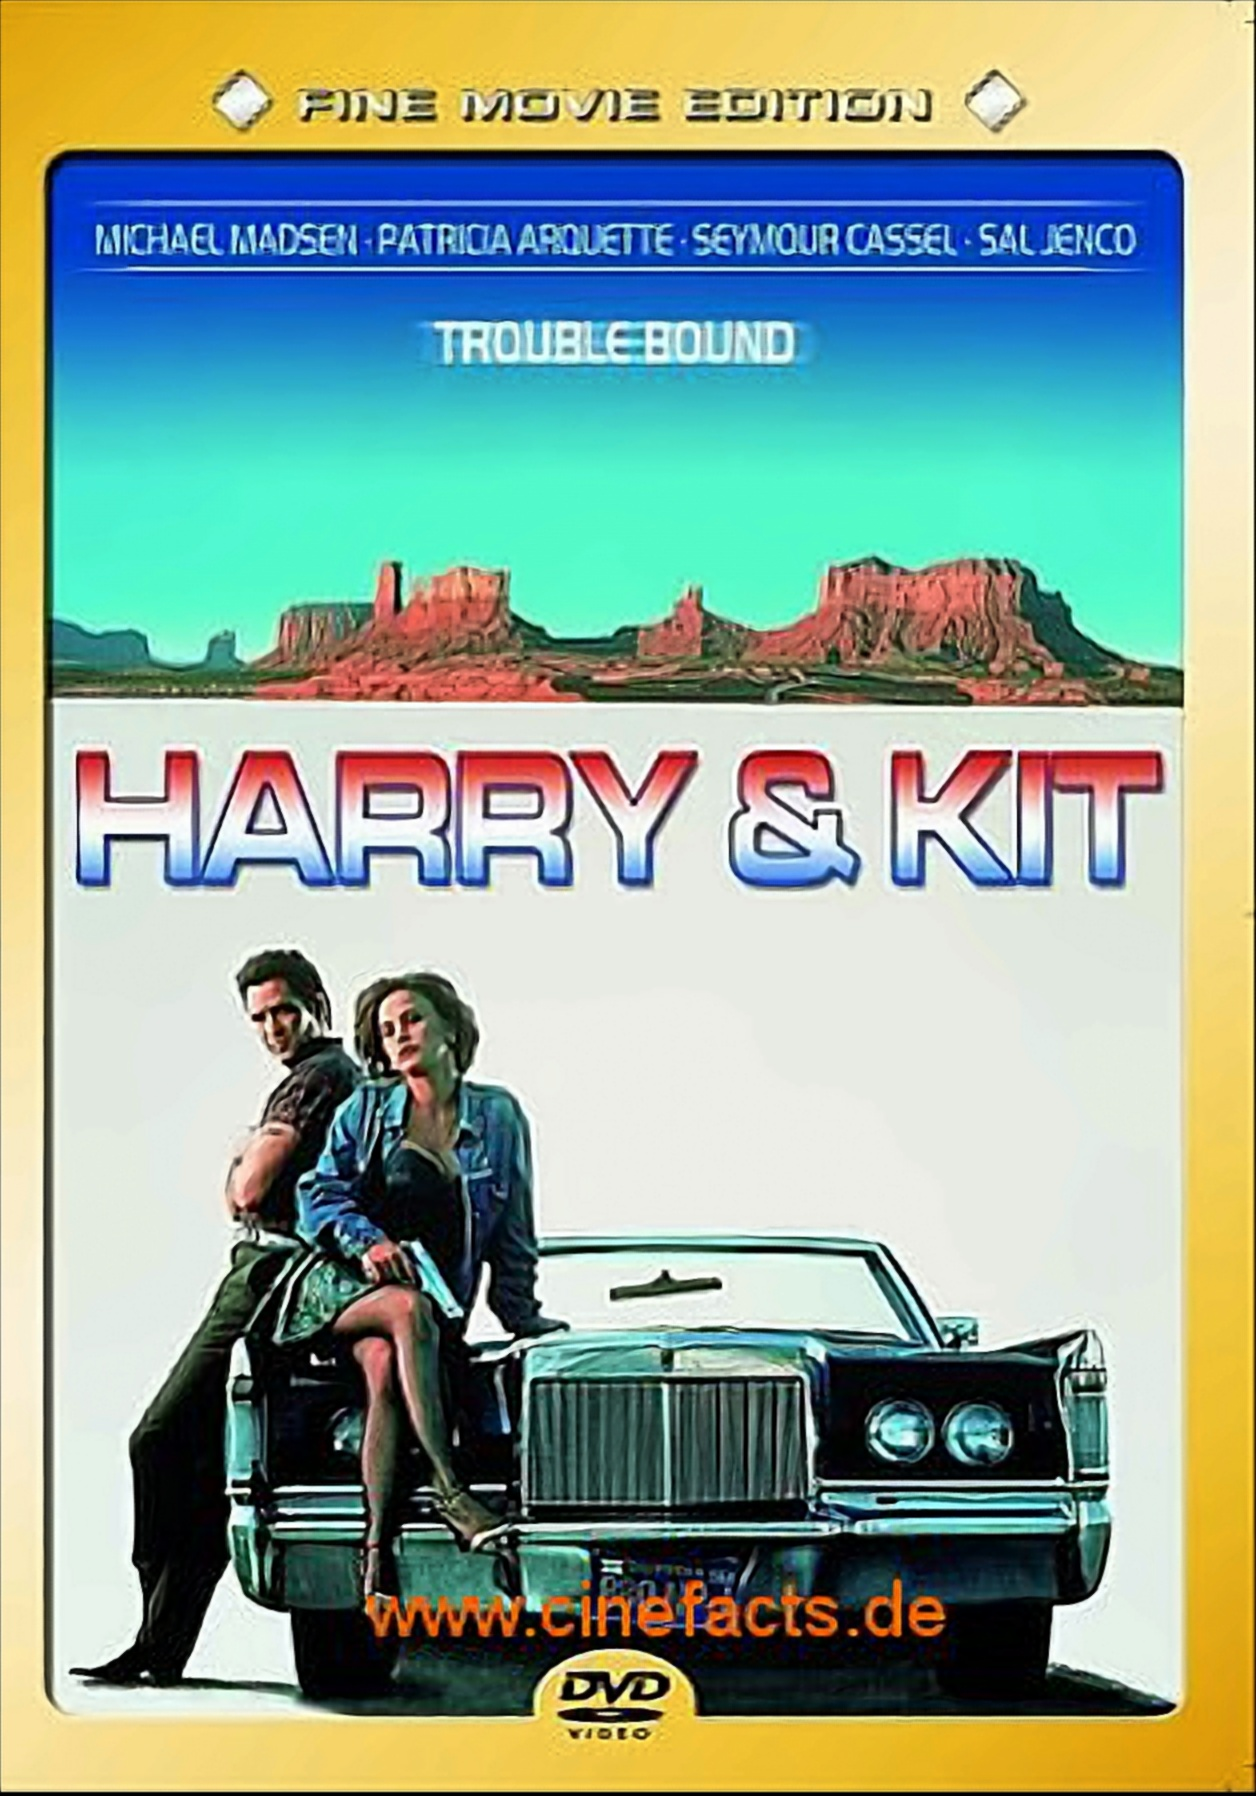 Kit & Harry Bound Trouble - DVD